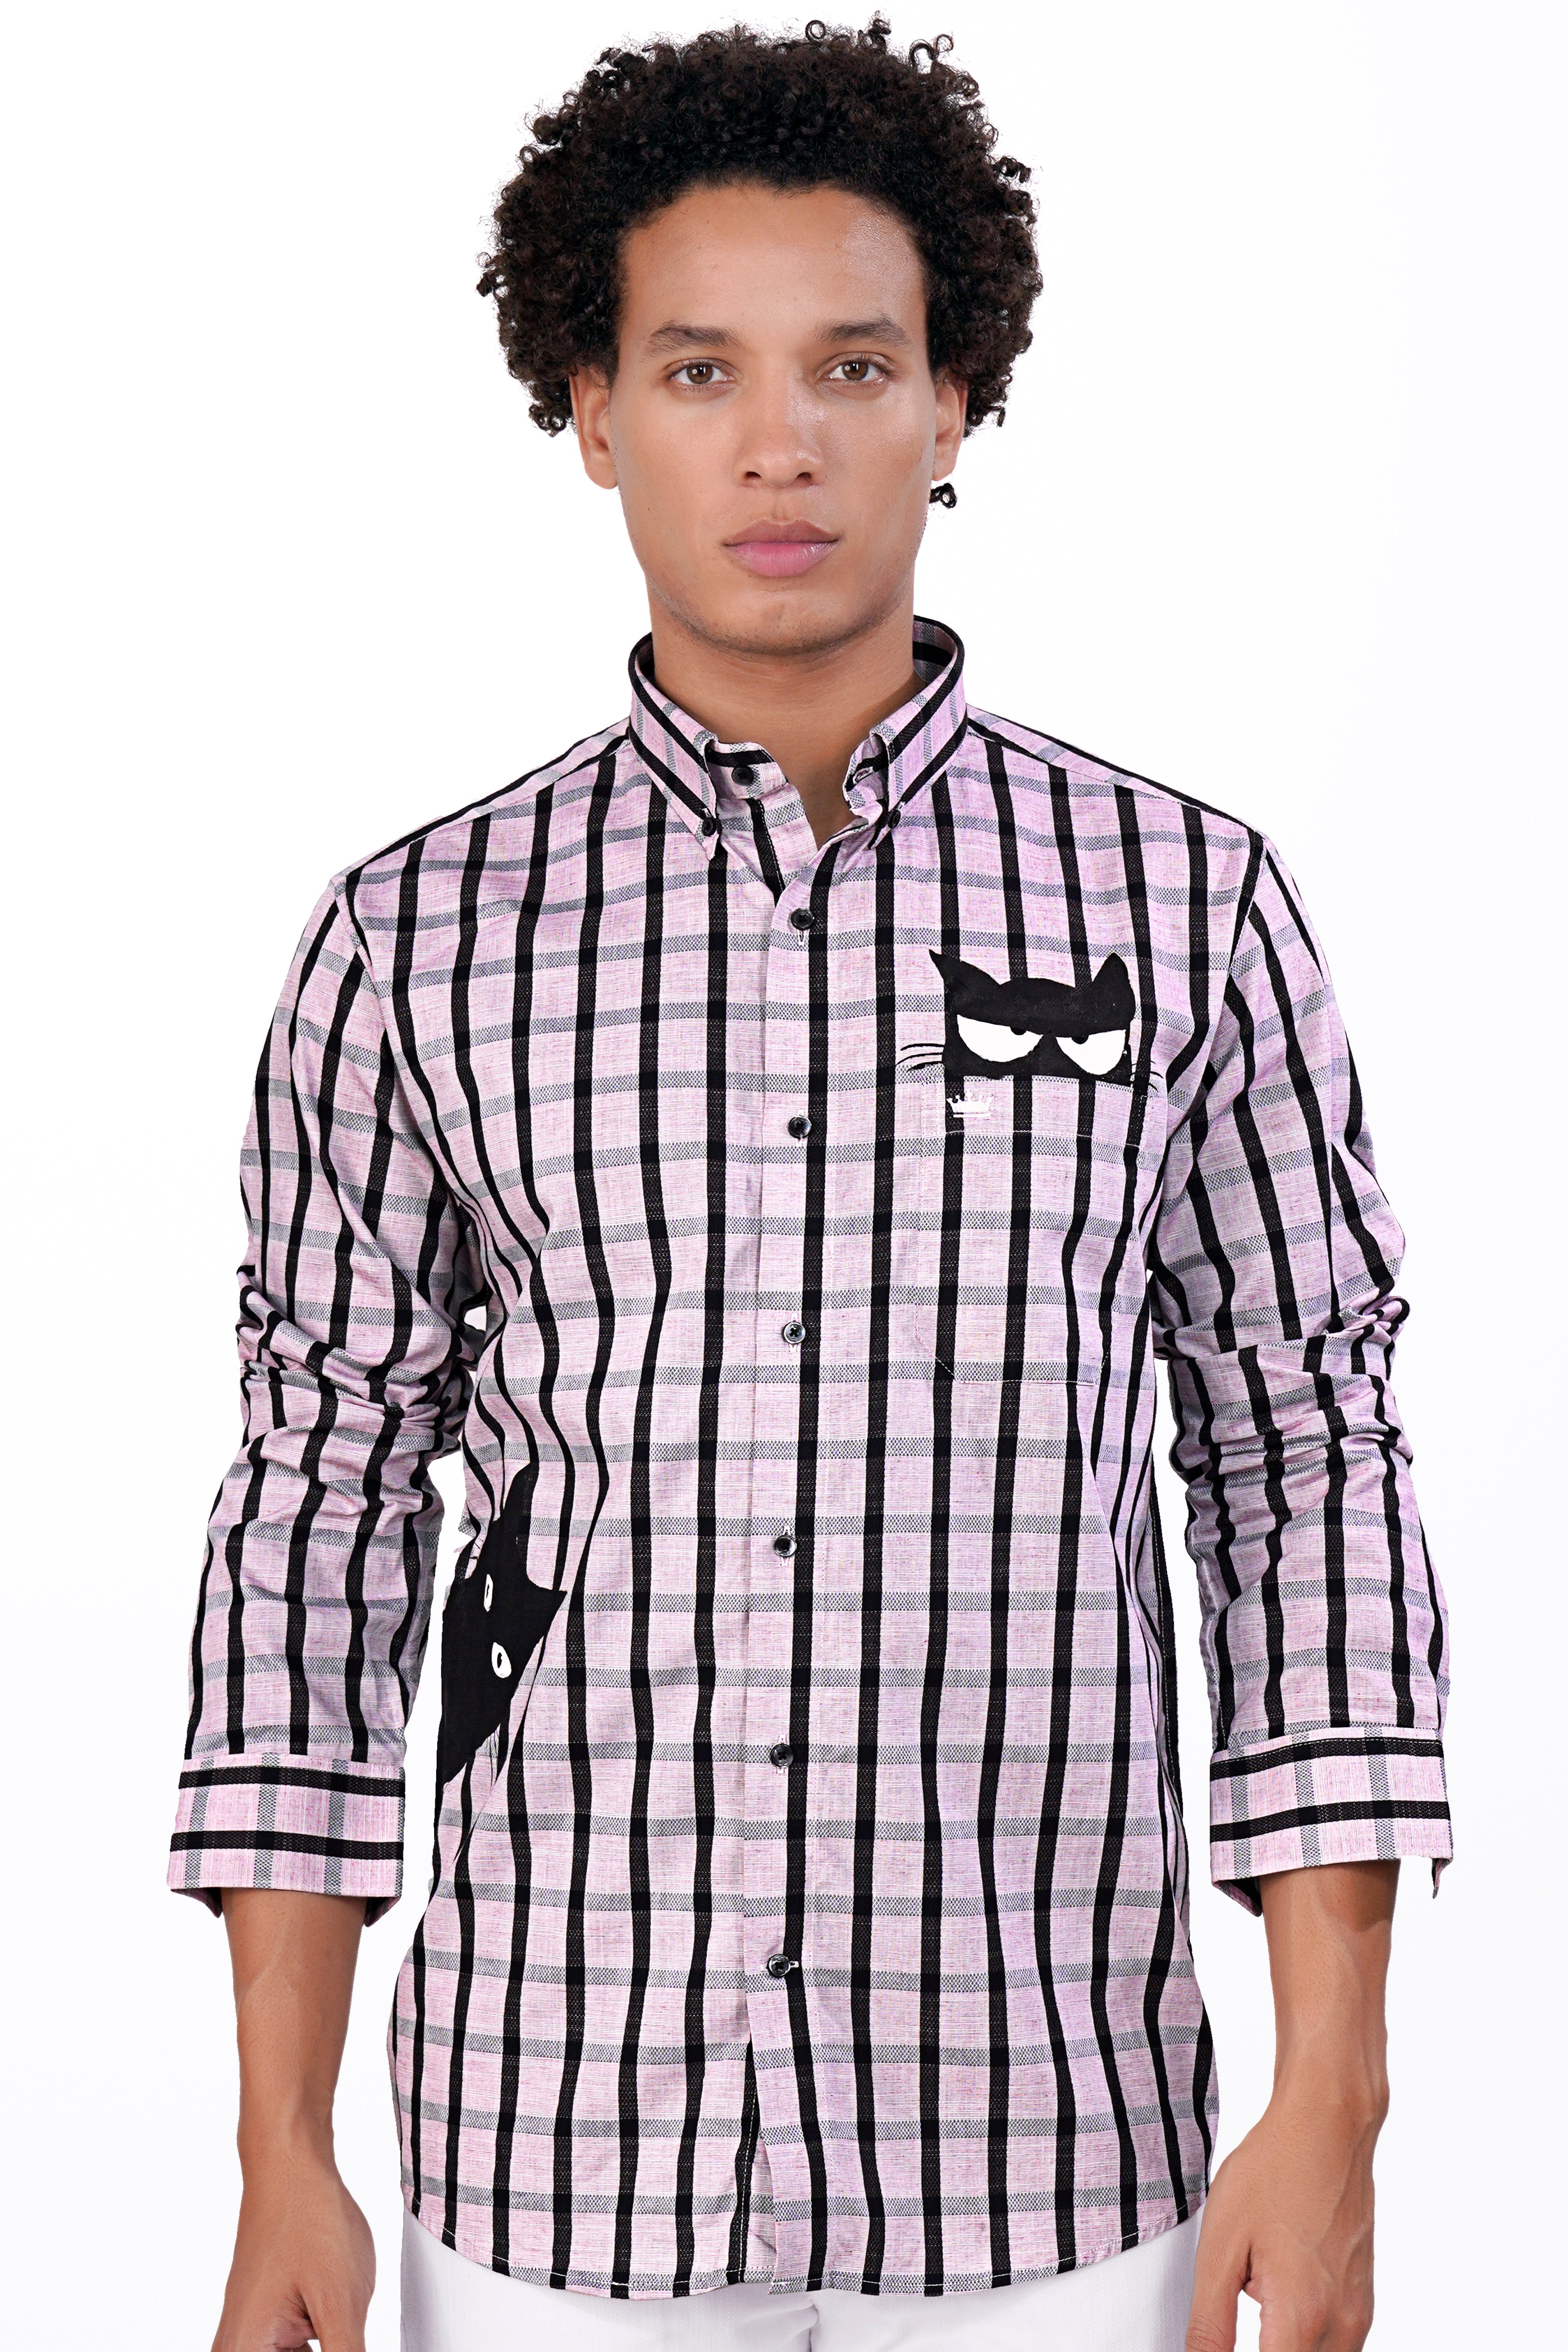 Mauve Pink with Black Striped and Cat Hand Painted Dobby Premium Giza Cotton Designer Shirt 7627-BD-BLK-ART-38, 7627-BD-BLK-ART-H-38, 7627-BD-BLK-ART-39, 7627-BD-BLK-ART-H-39, 7627-BD-BLK-ART-40, 7627-BD-BLK-ART-H-40, 7627-BD-BLK-ART-42, 7627-BD-BLK-ART-H-42, 7627-BD-BLK-ART-44, 7627-BD-BLK-ART-H-44, 7627-BD-BLK-ART-46, 7627-BD-BLK-ART-H-46, 7627-BD-BLK-ART-48, 7627-BD-BLK-ART-H-48, 7627-BD-BLK-ART-50, 7627-BD-BLK-ART-H-50, 7627-BD-BLK-ART-52, 7627-BD-BLK-ART-H-52